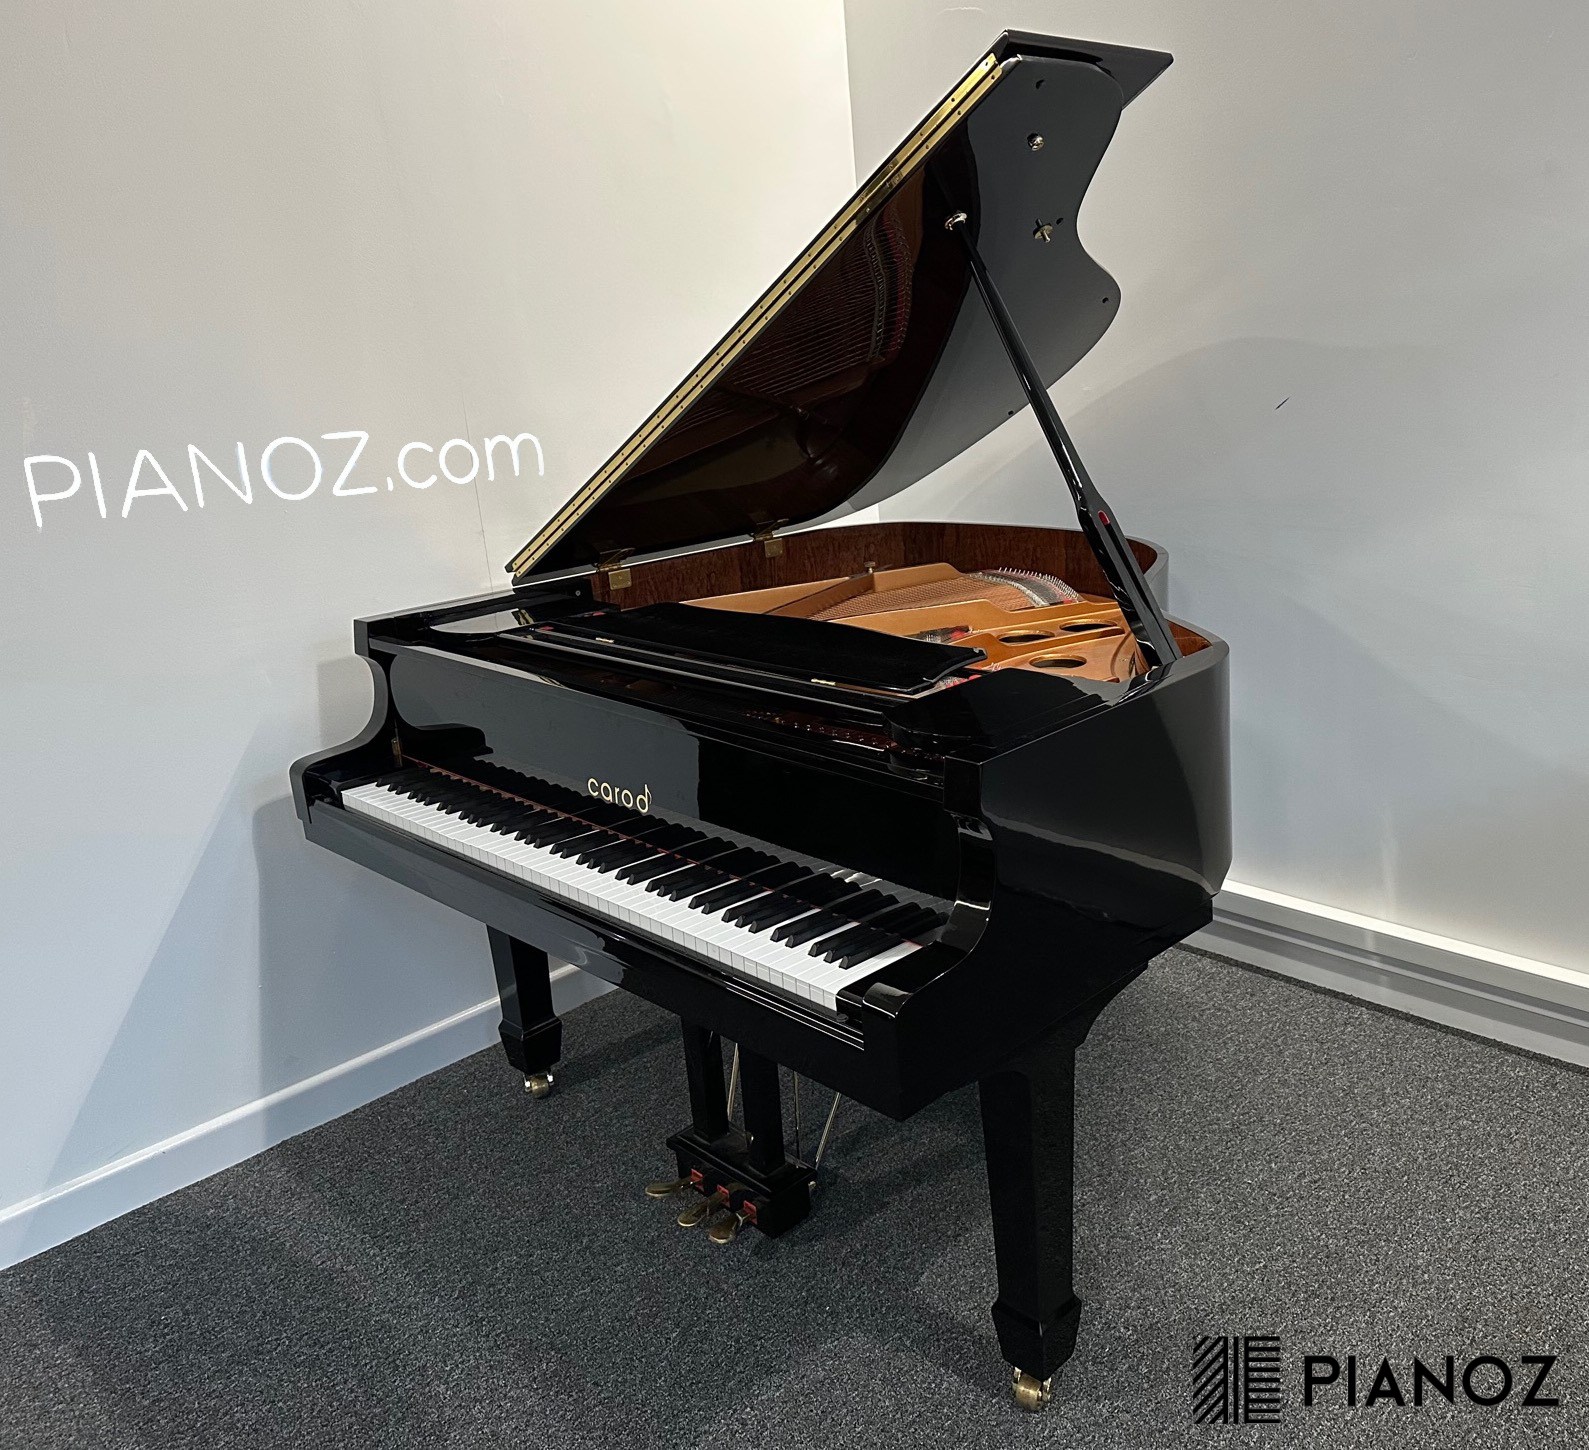 Carod Pianodisc IQ Self Playing Baby Grand Piano piano for sale in UK